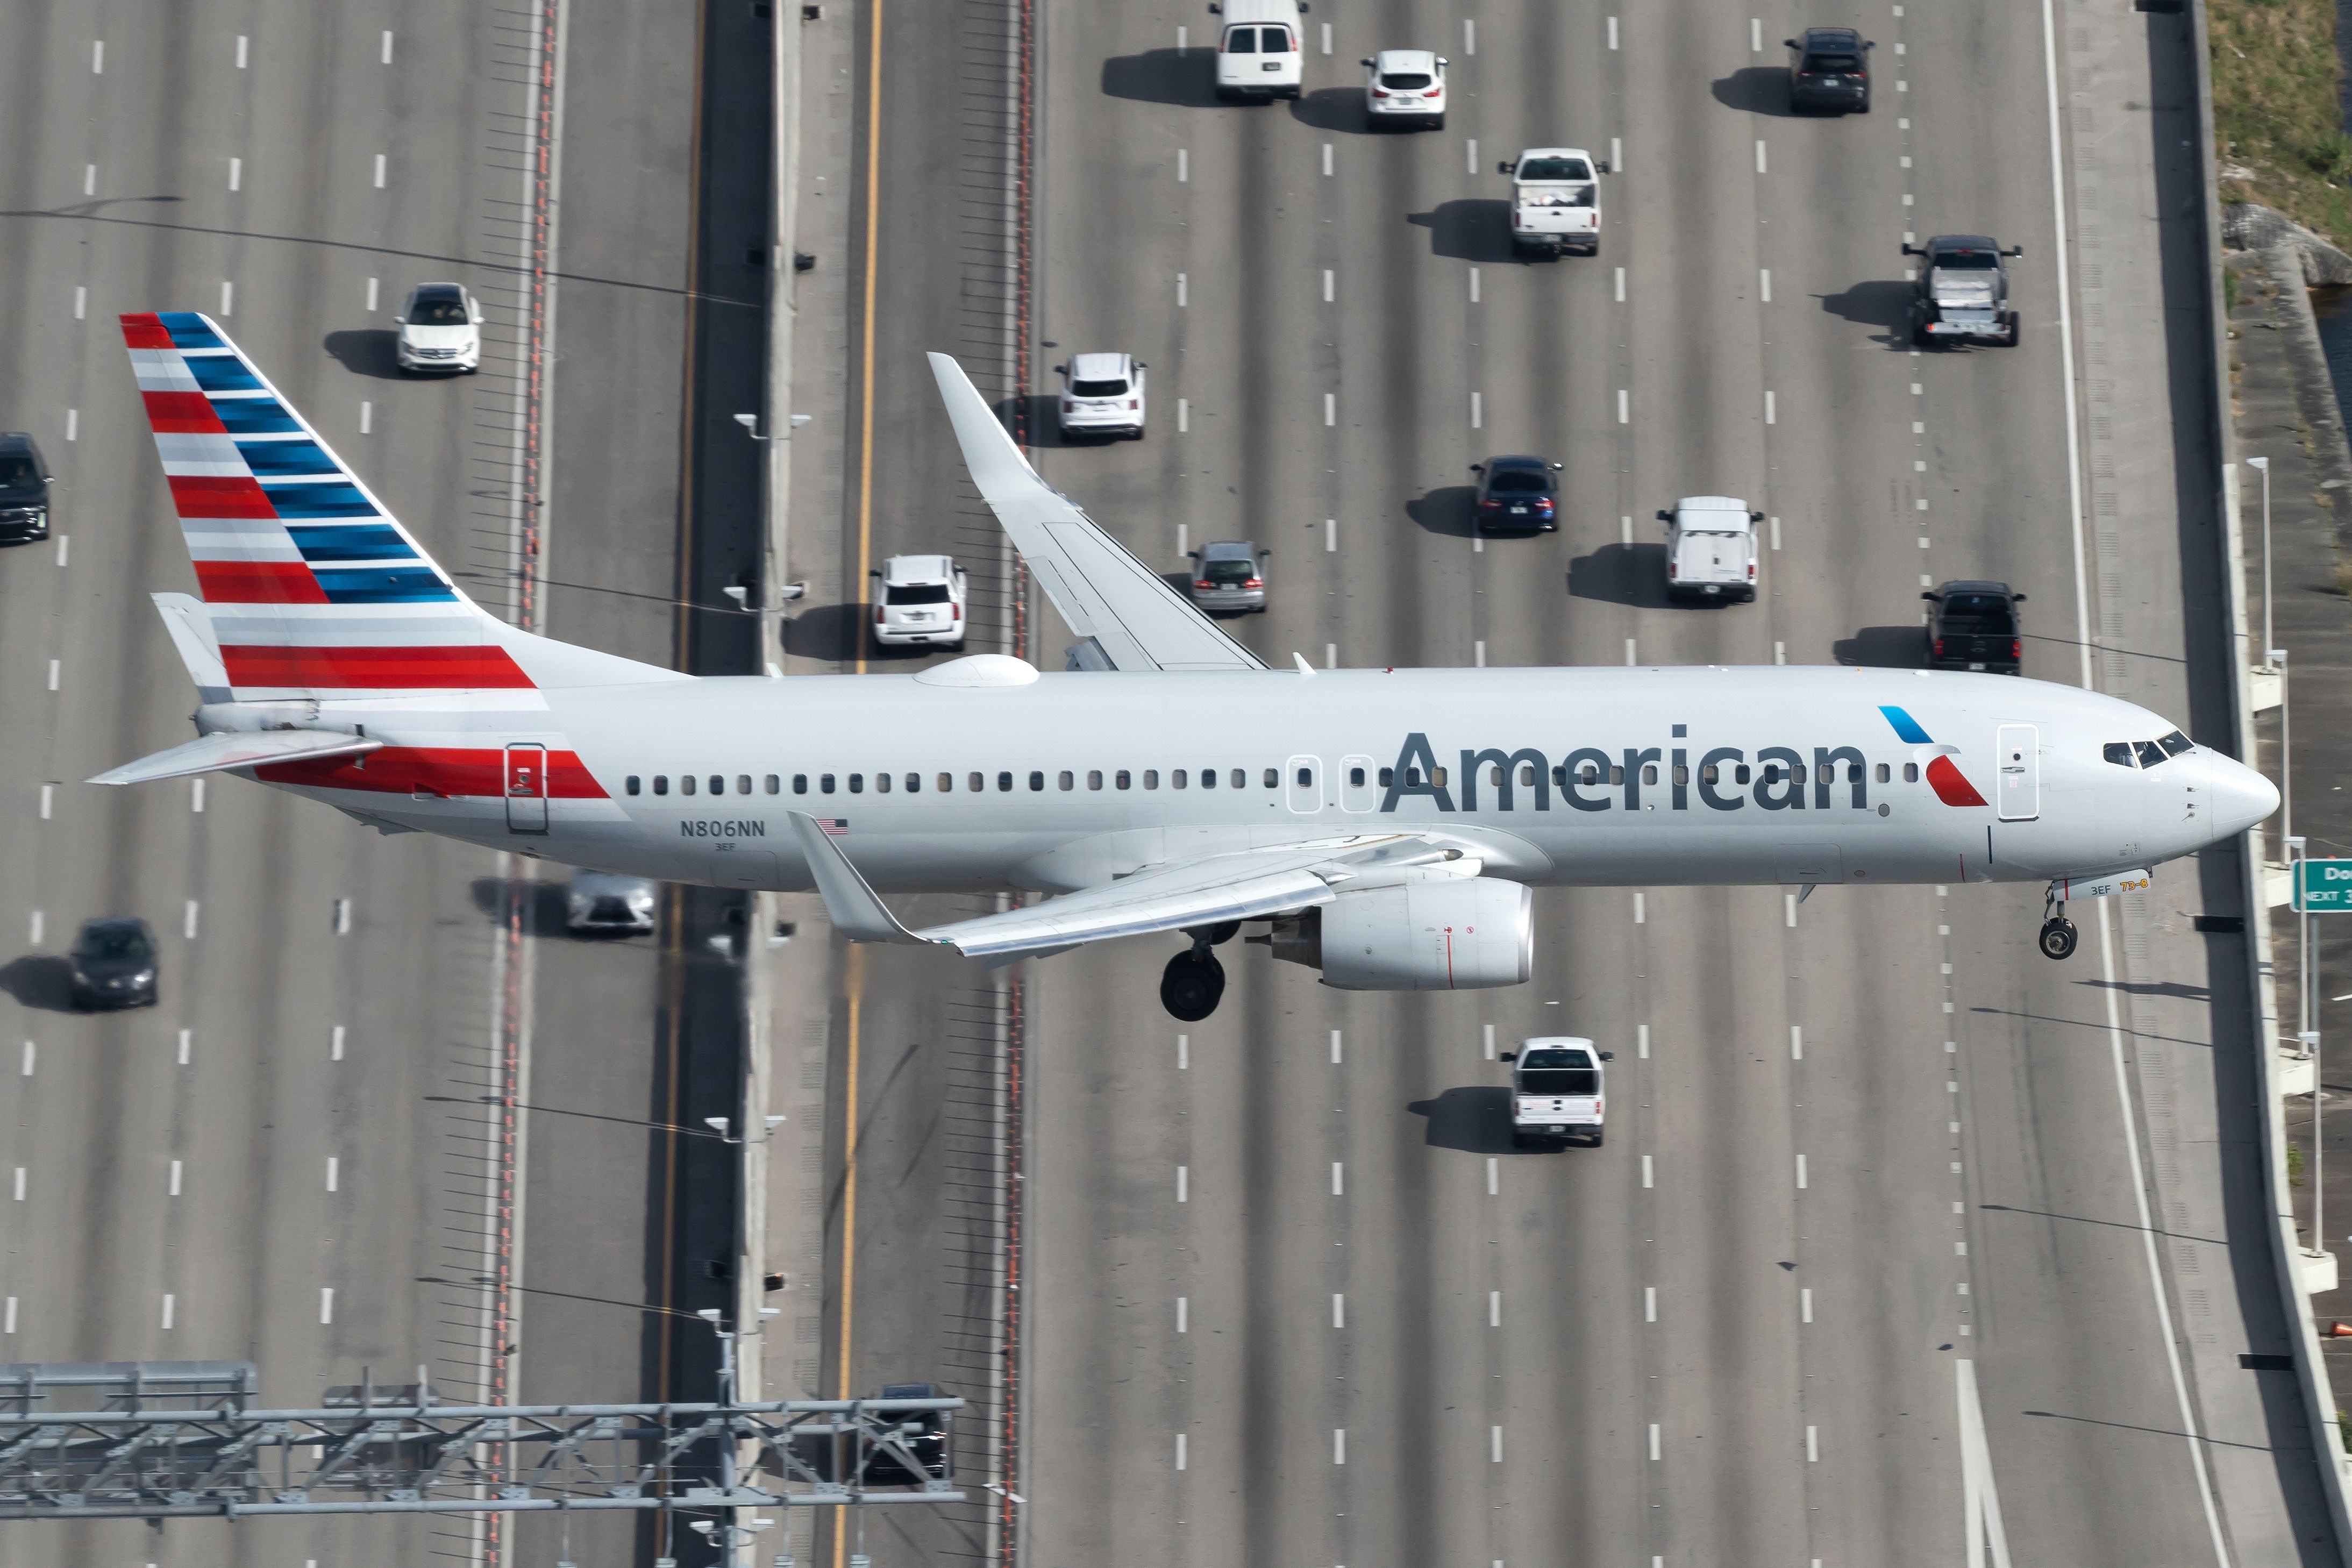 An American Airlines Boeing 737-800 flying over a major highway.